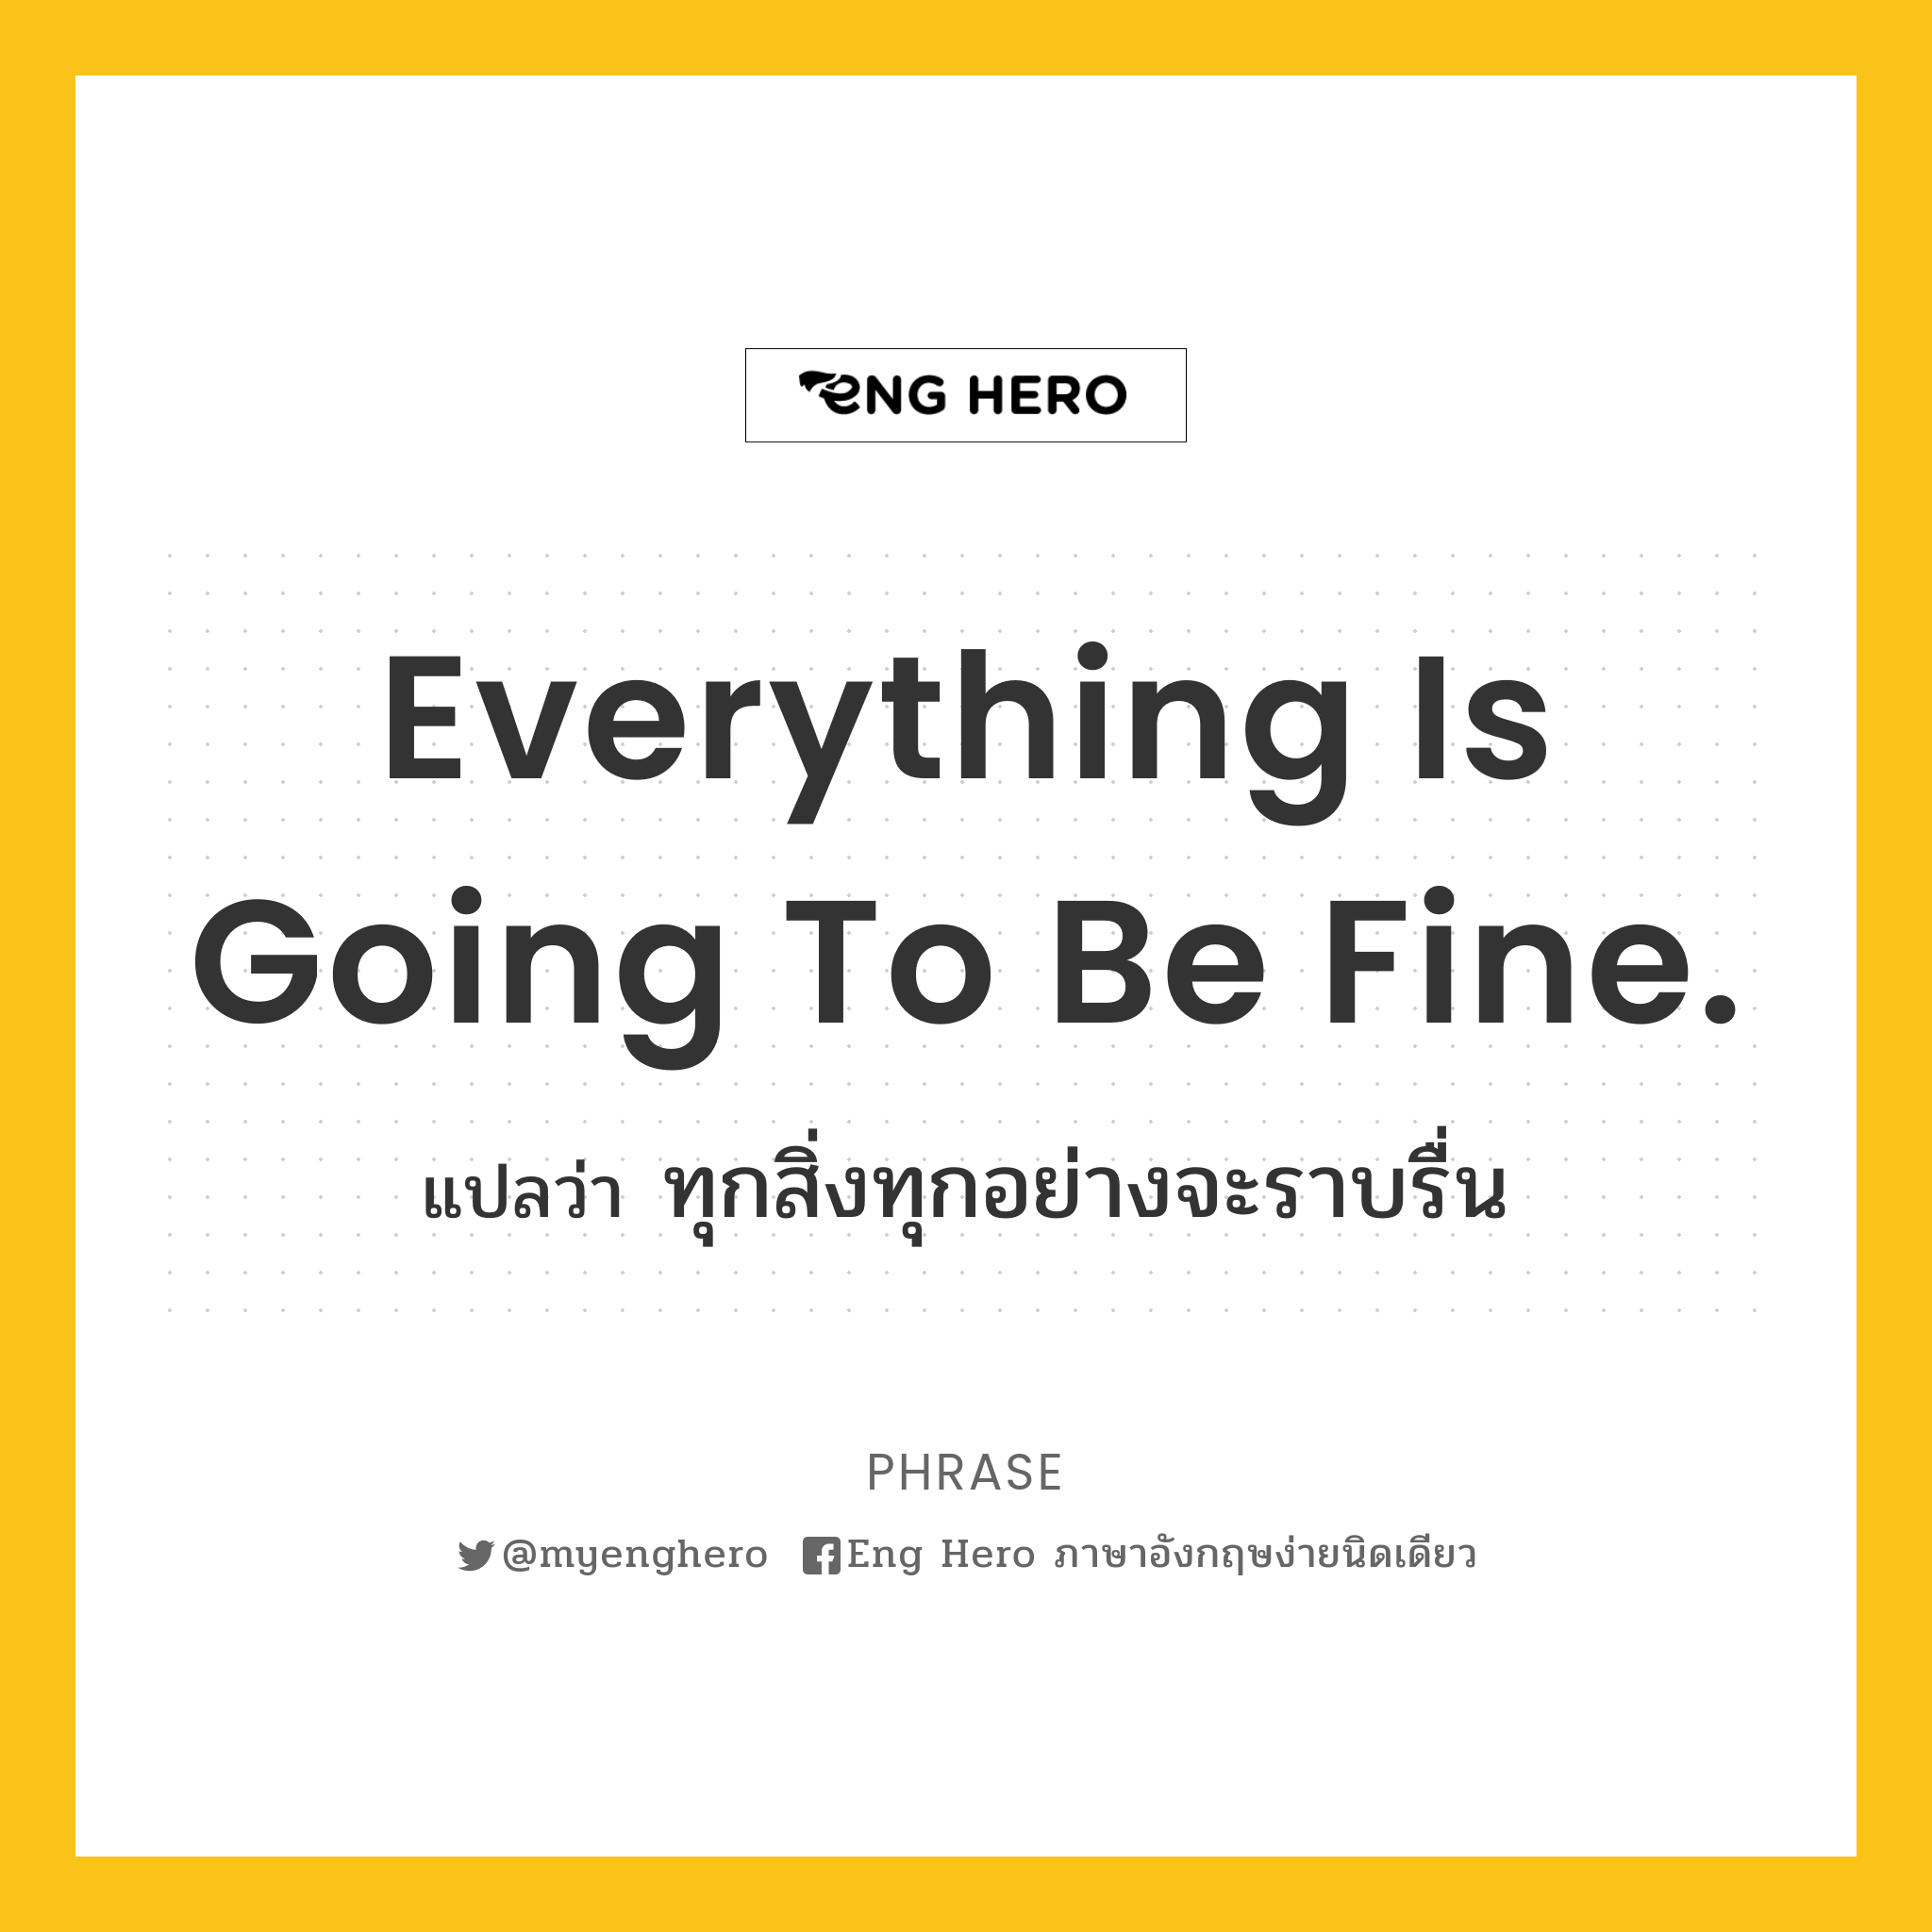 Everything is going to be fine.